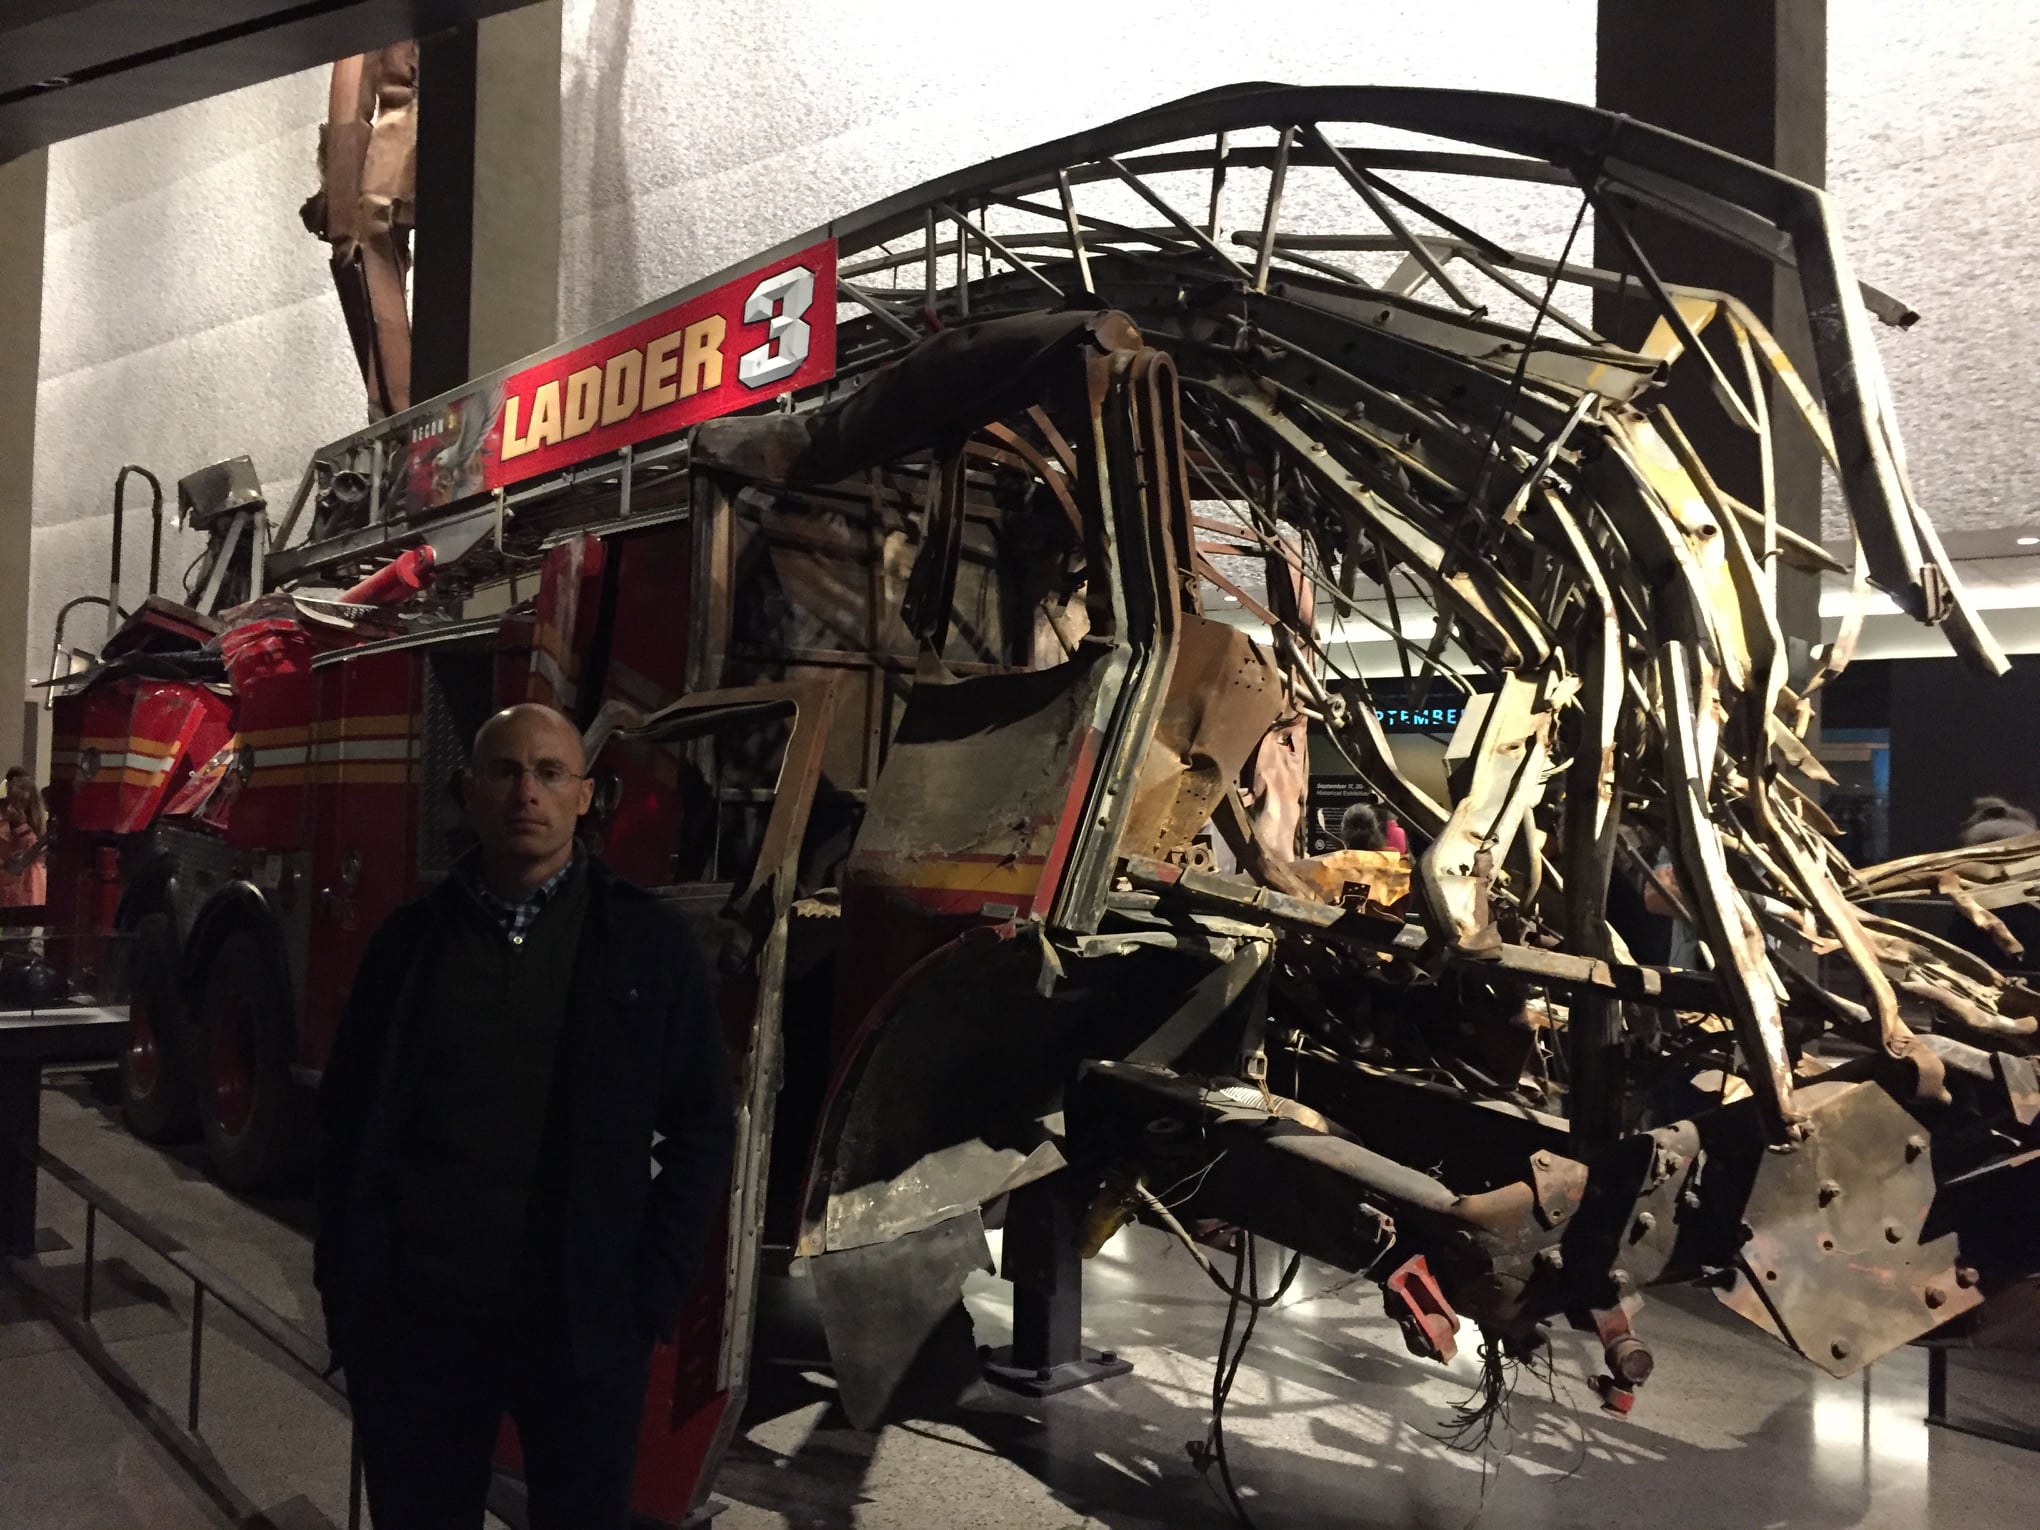 Tim Farmer (ARO) besides the heavily damaged firetruck of Ladder Company 3 sits in the Museum. This close-up view shows the bright red vehicle’s twisted ladder and broken compartment doors.